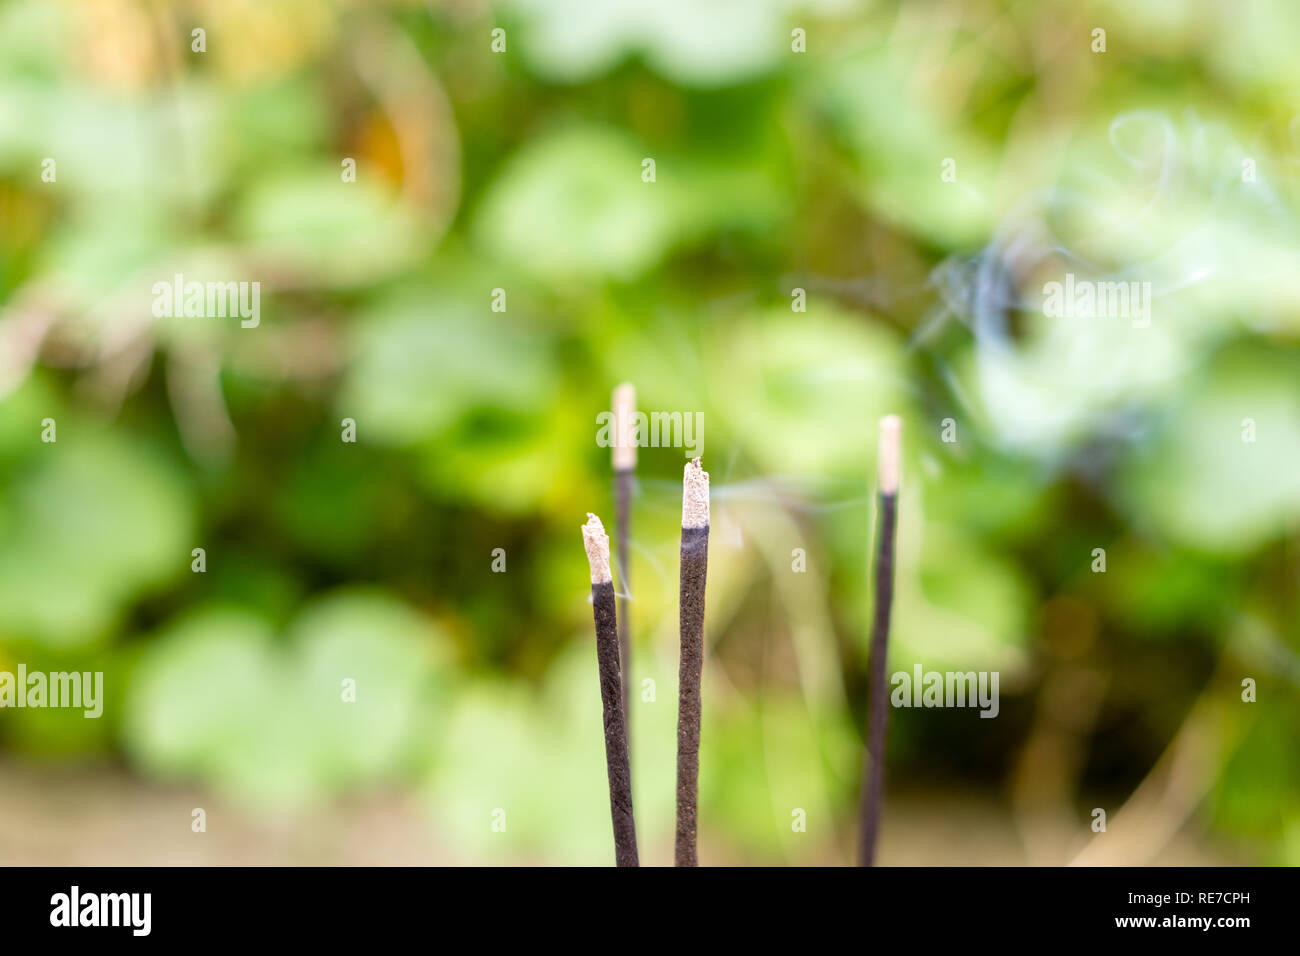 Close-up of Incense sticks burning. Selective focus on central stick Stock Photo